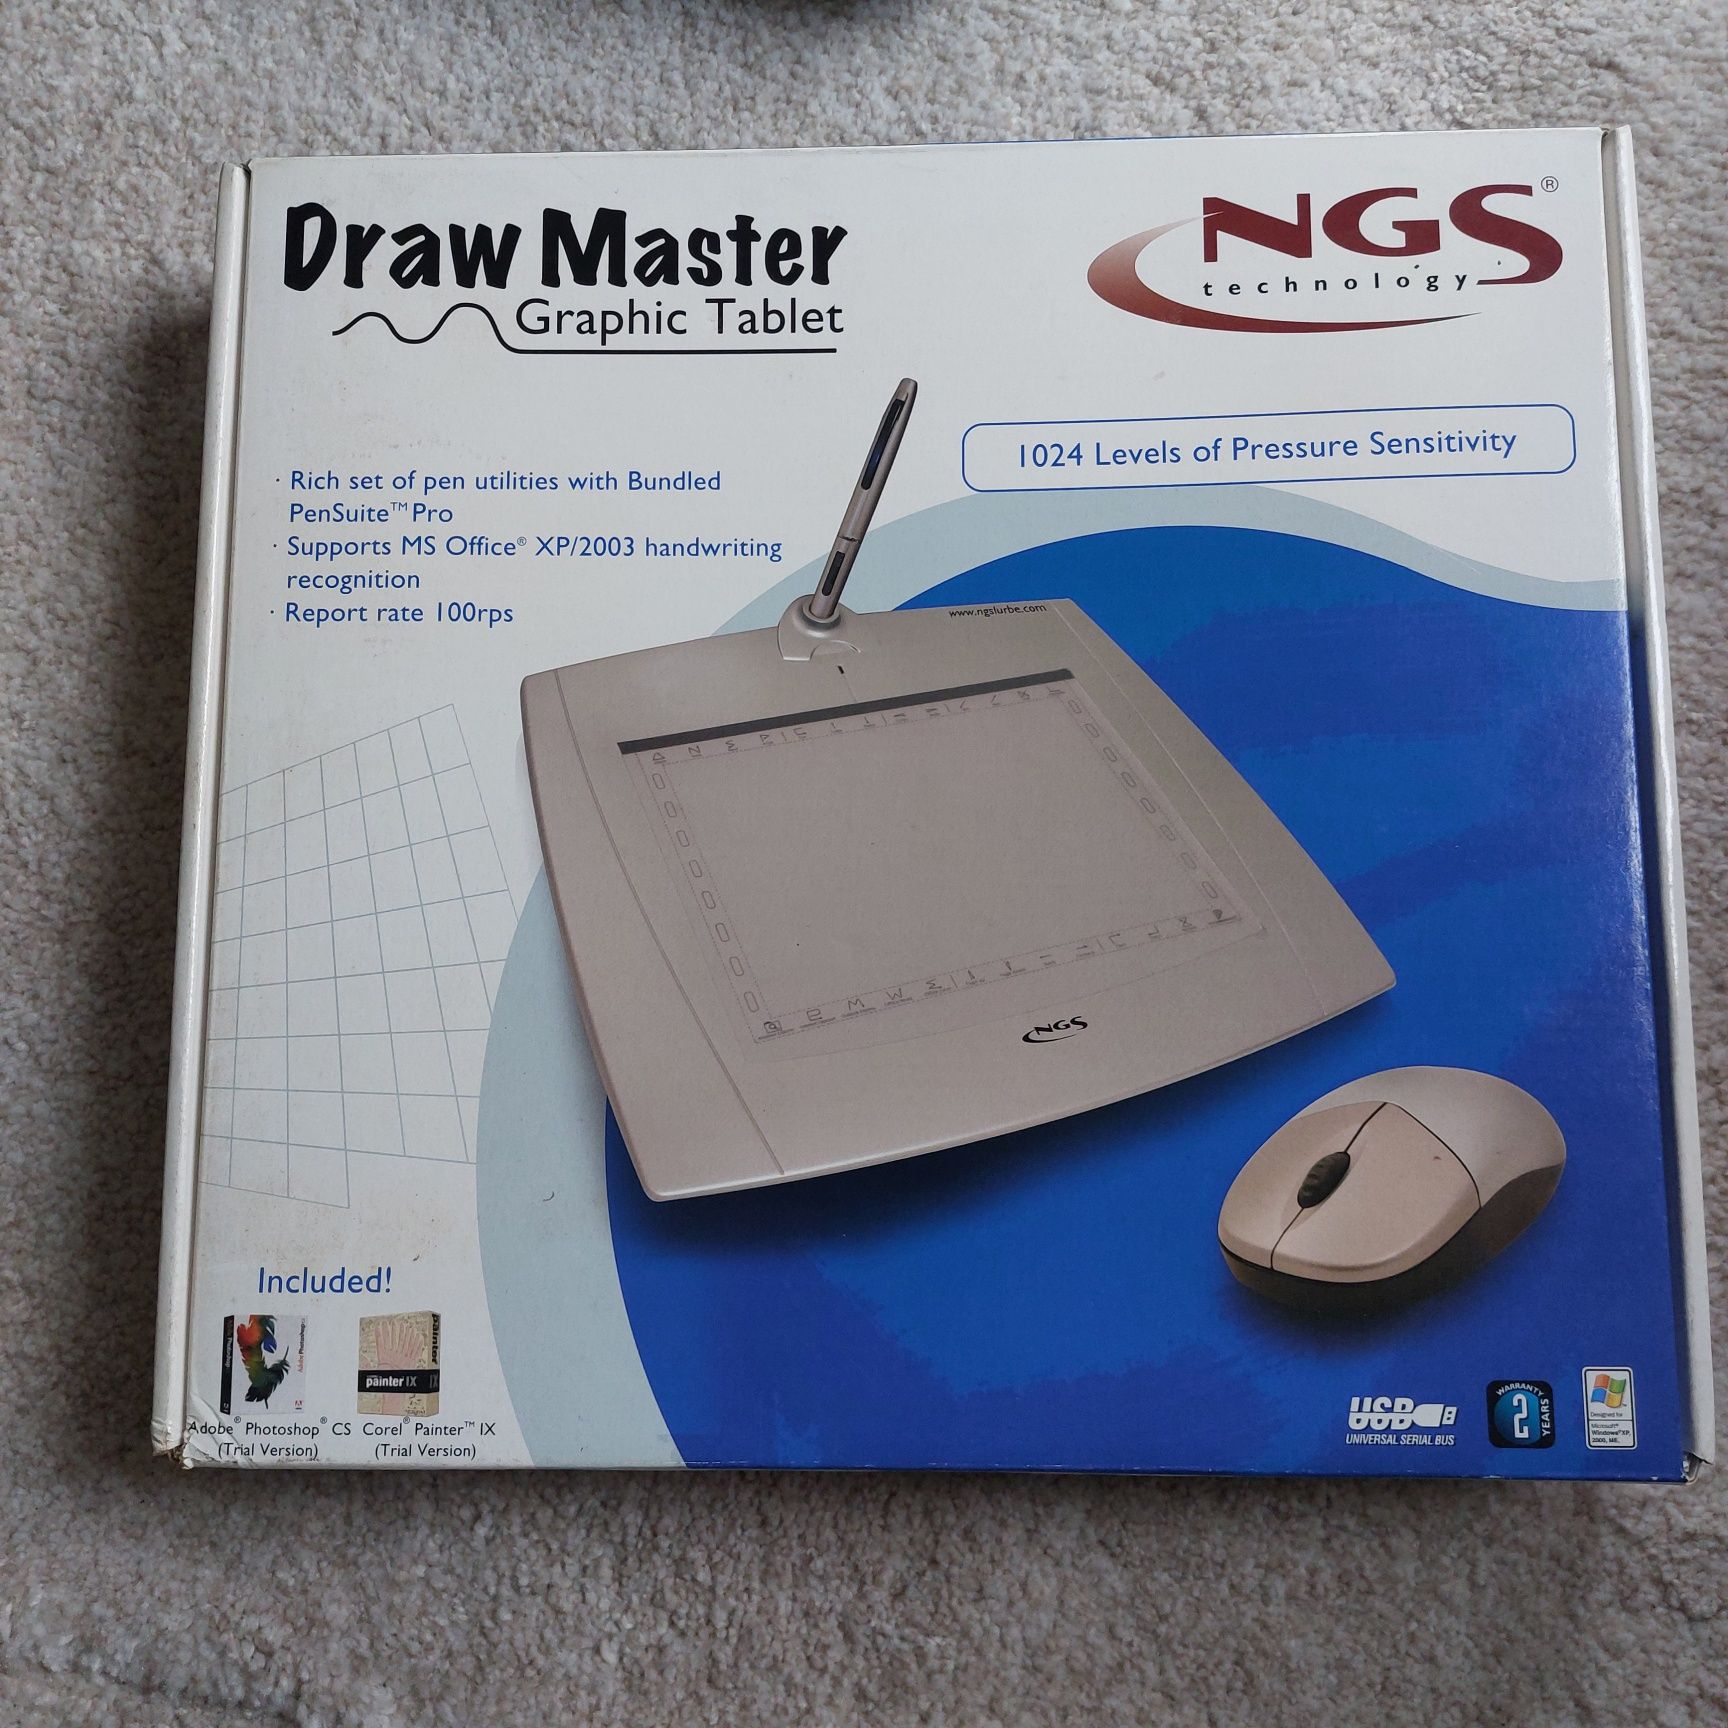 Ngs Draw Master graphic tablet